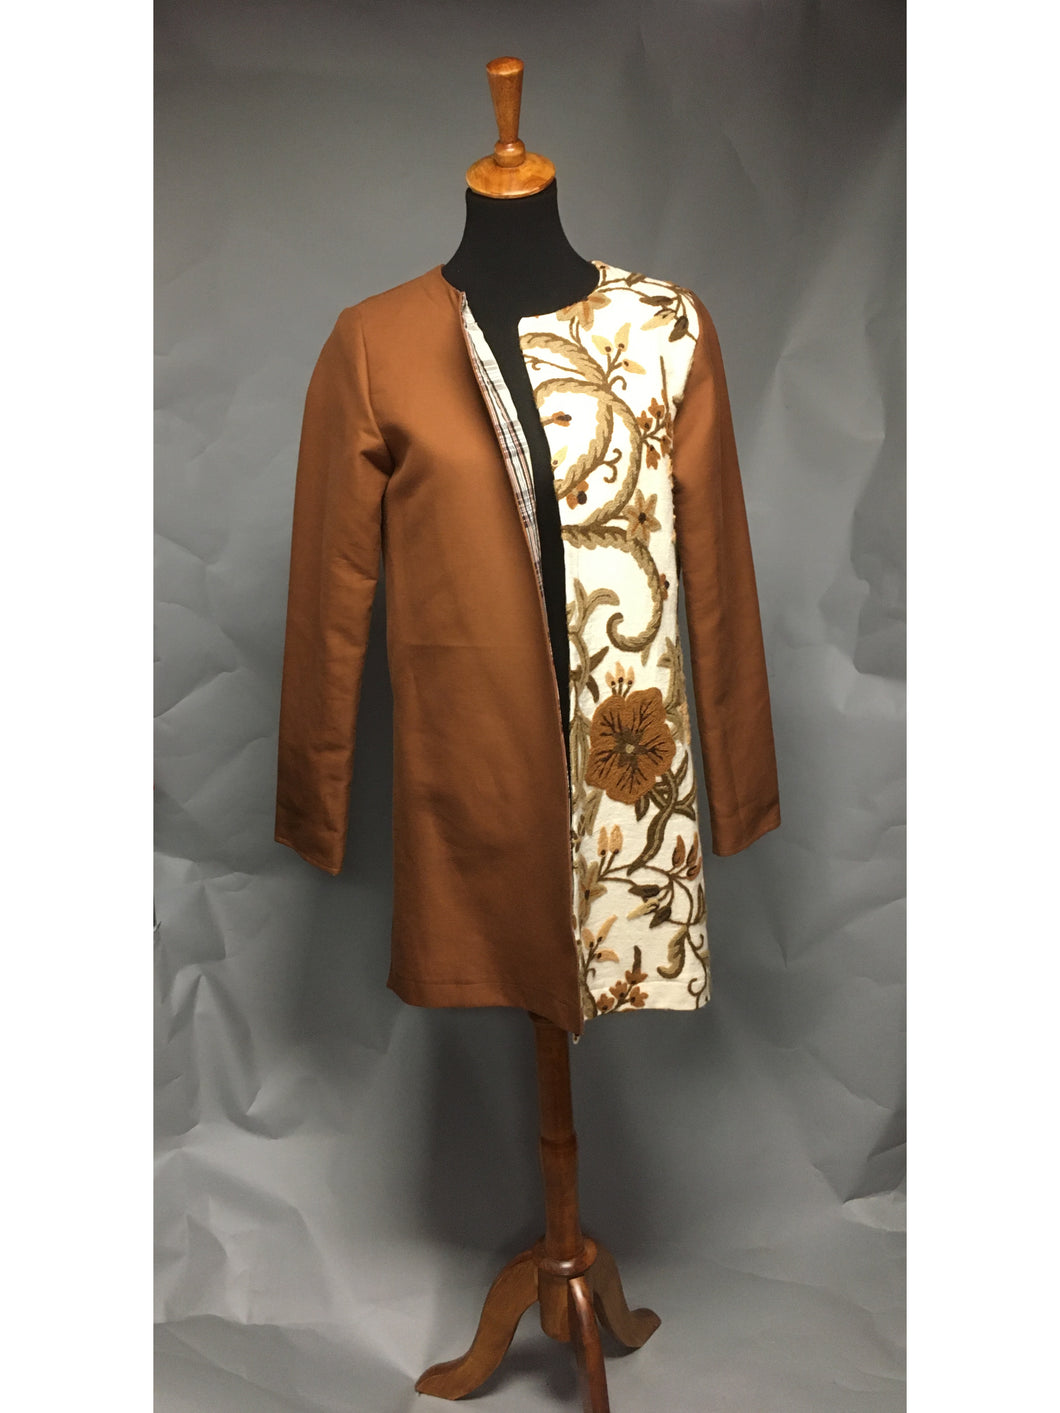 *Lined Coat in Brown with Vintage Crewelwork Panel